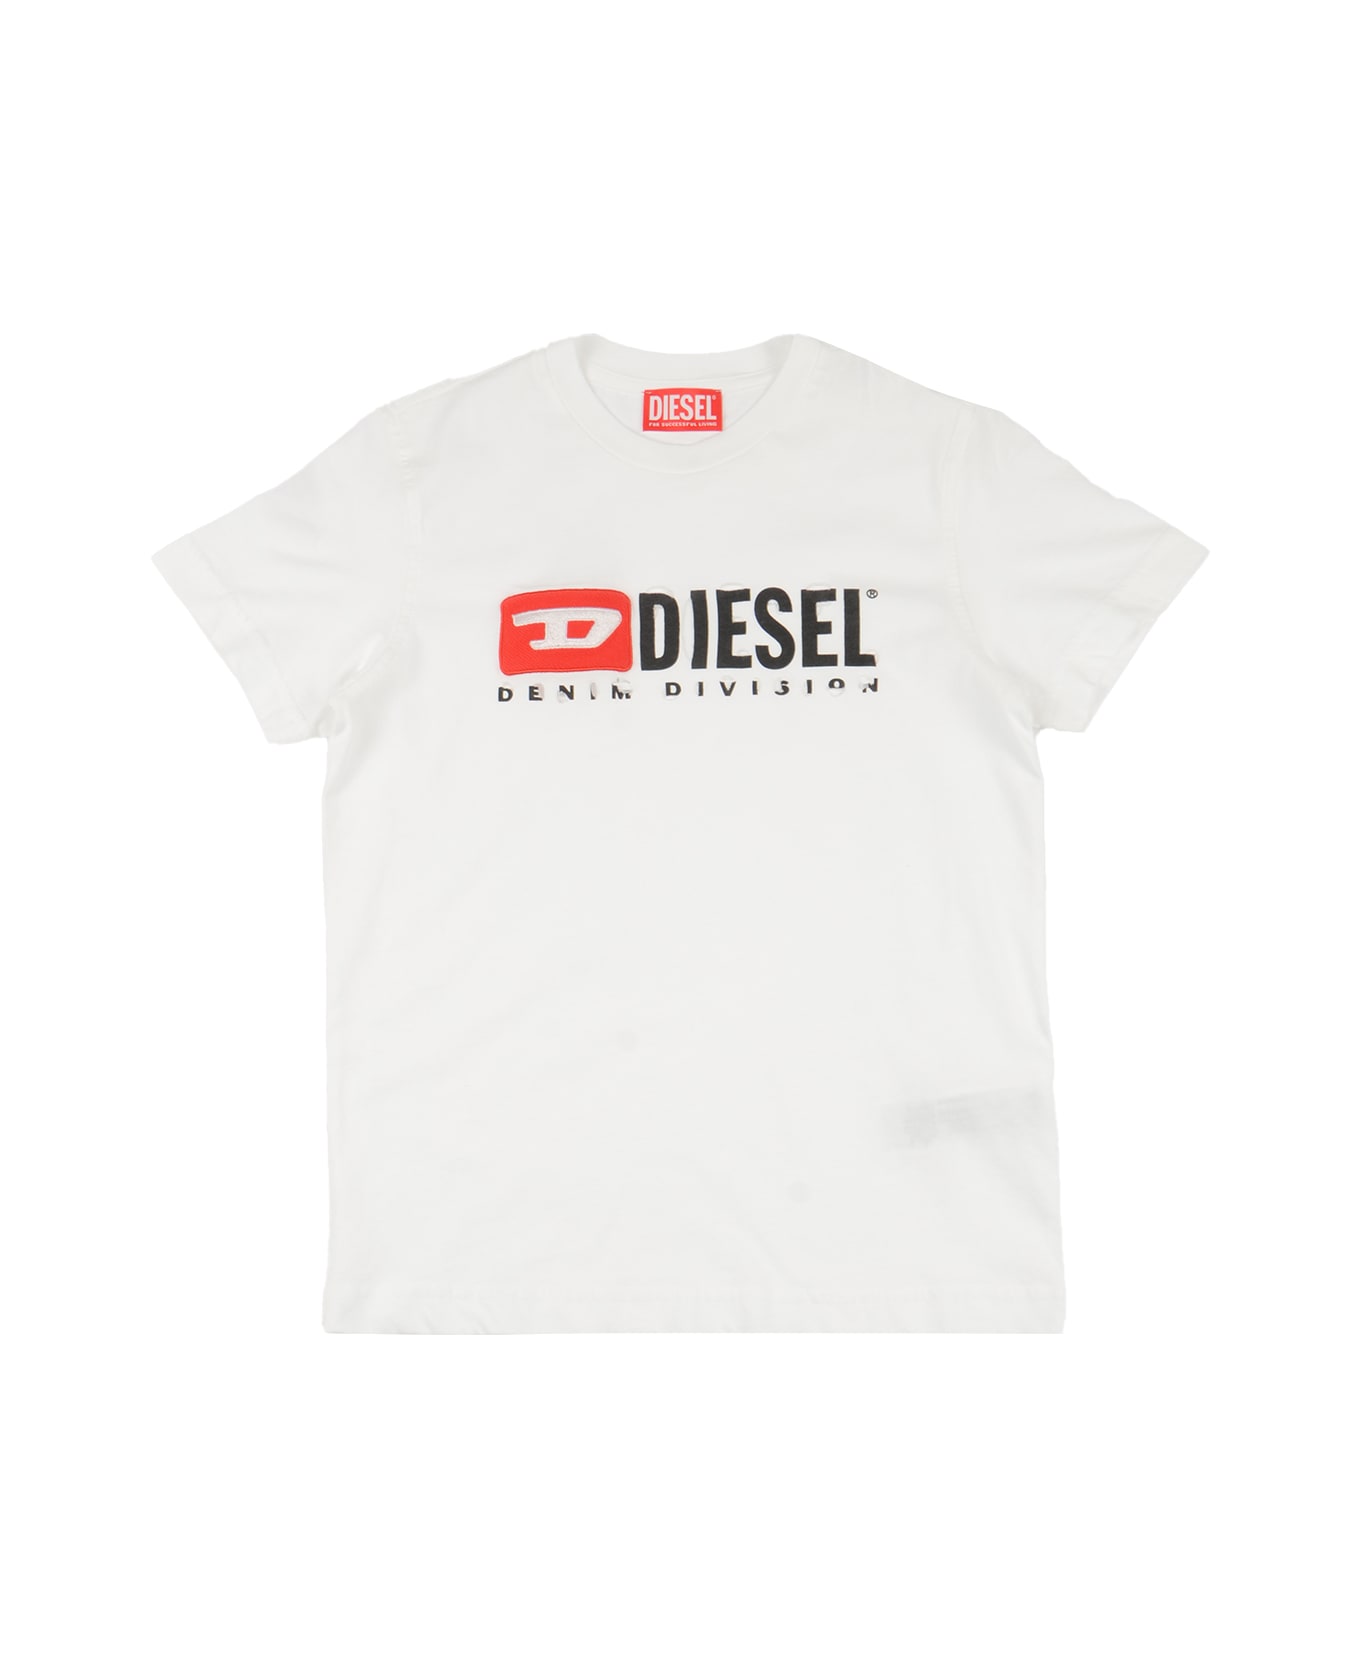 Diesel Tinydivstroyed T-shirt